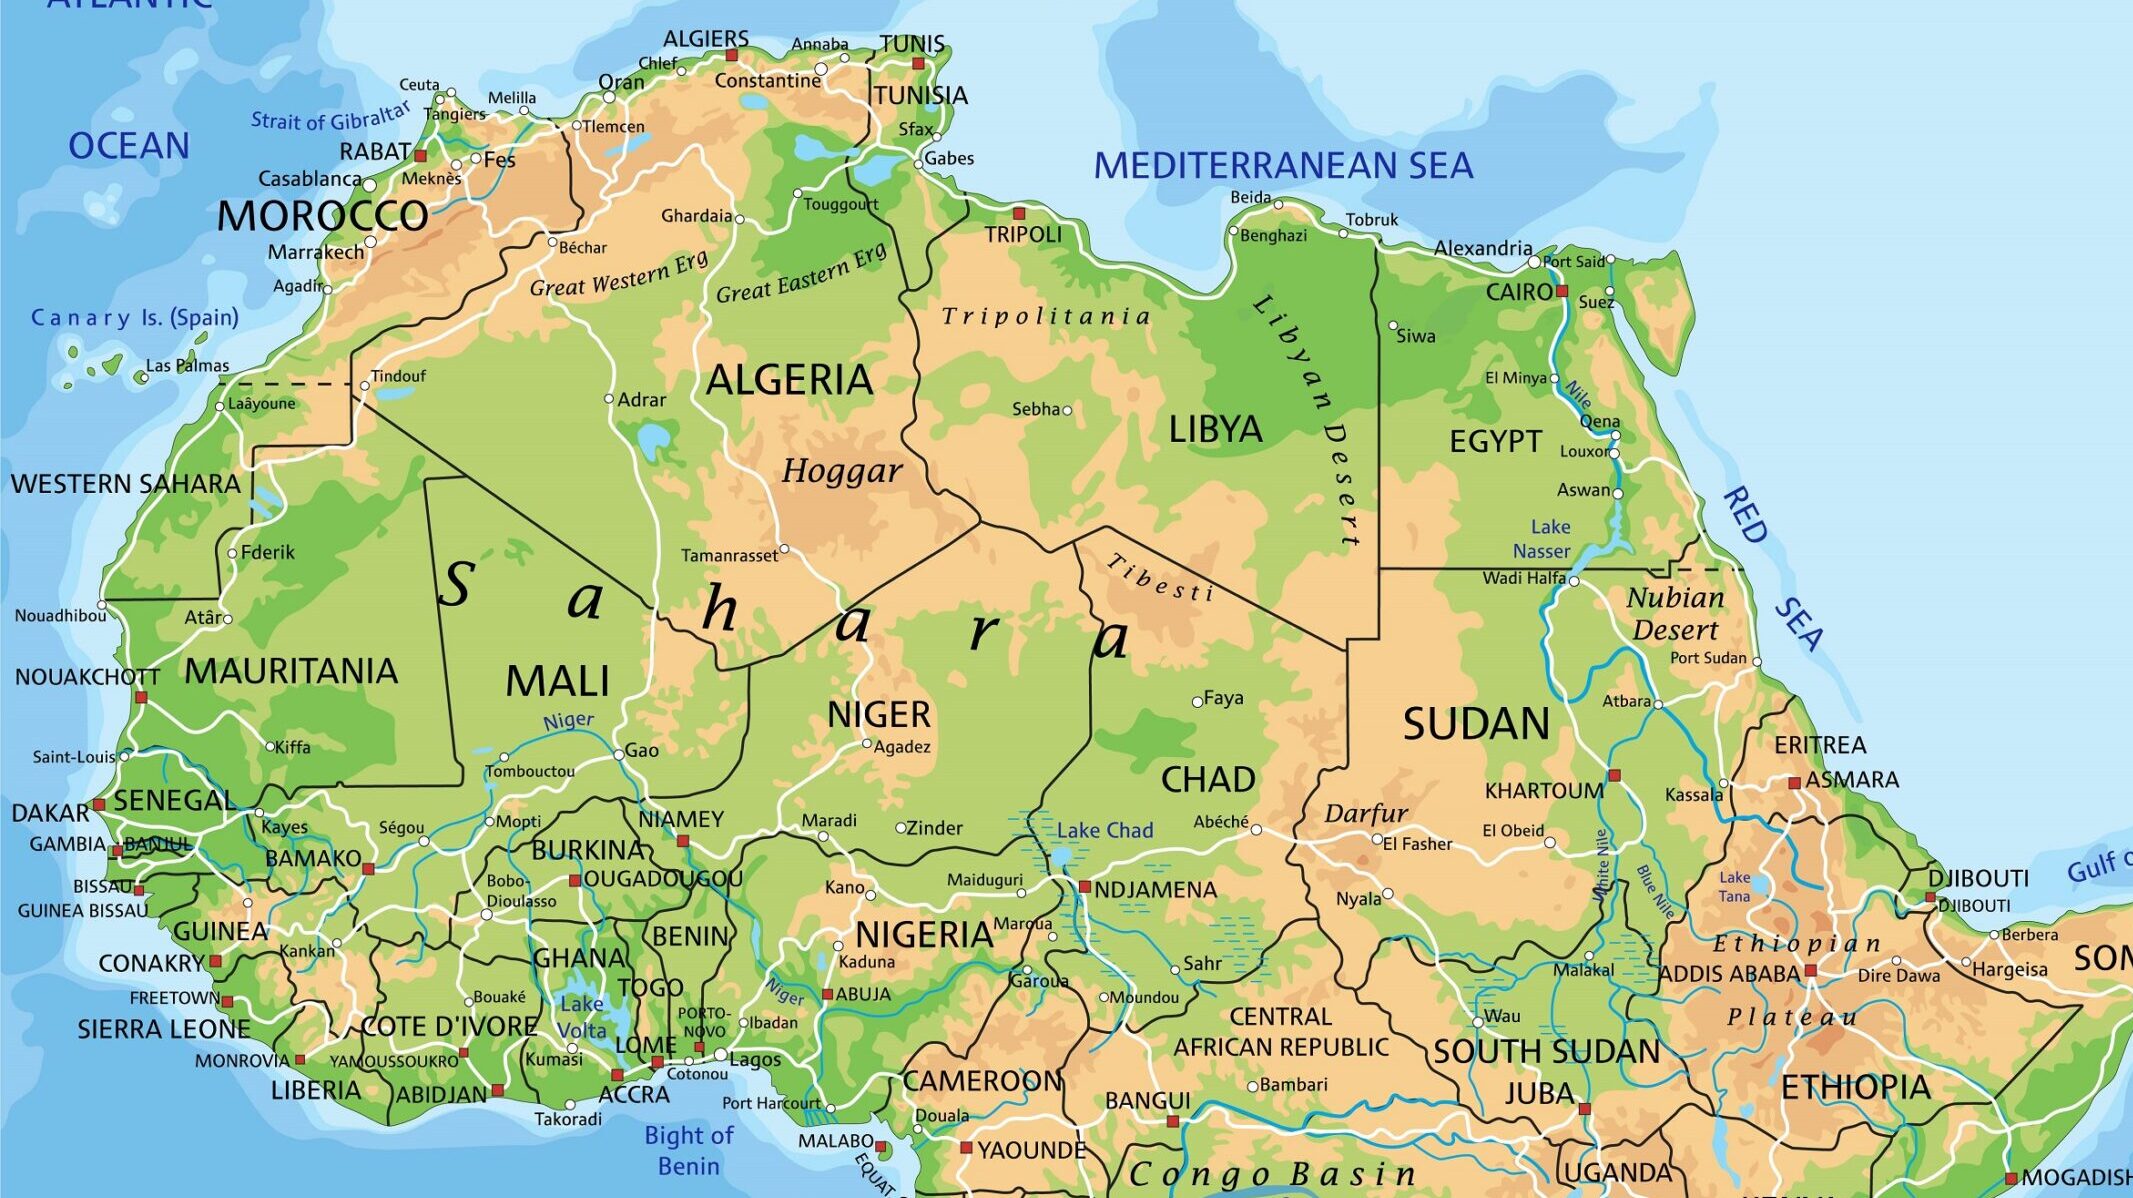 Sahel Nations Join Forces With Morocco for Atlantic Access